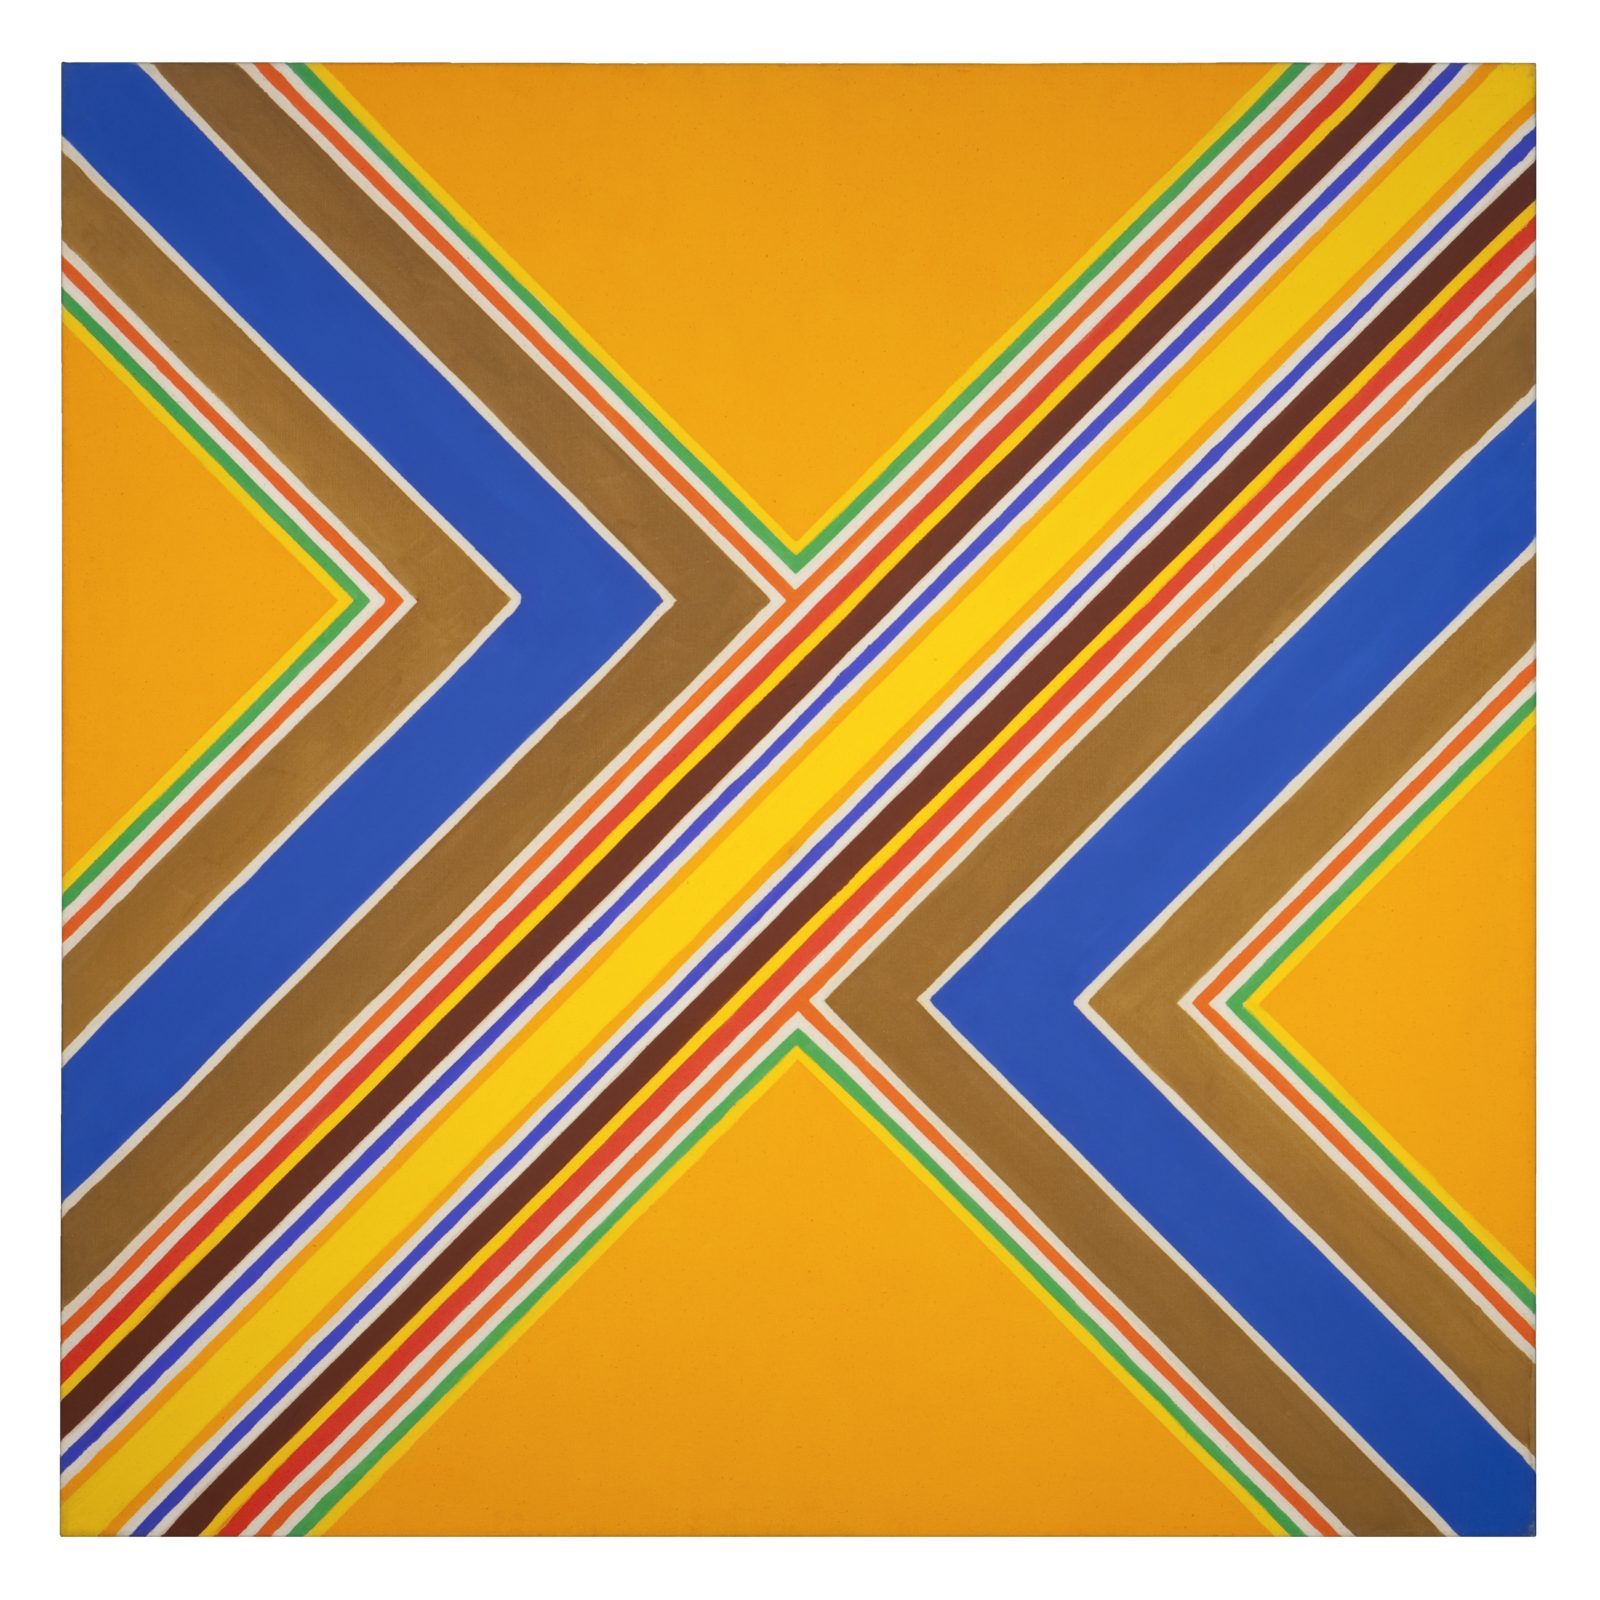 An abstract painting with multicolored stripes creating an X shape on orange ground.